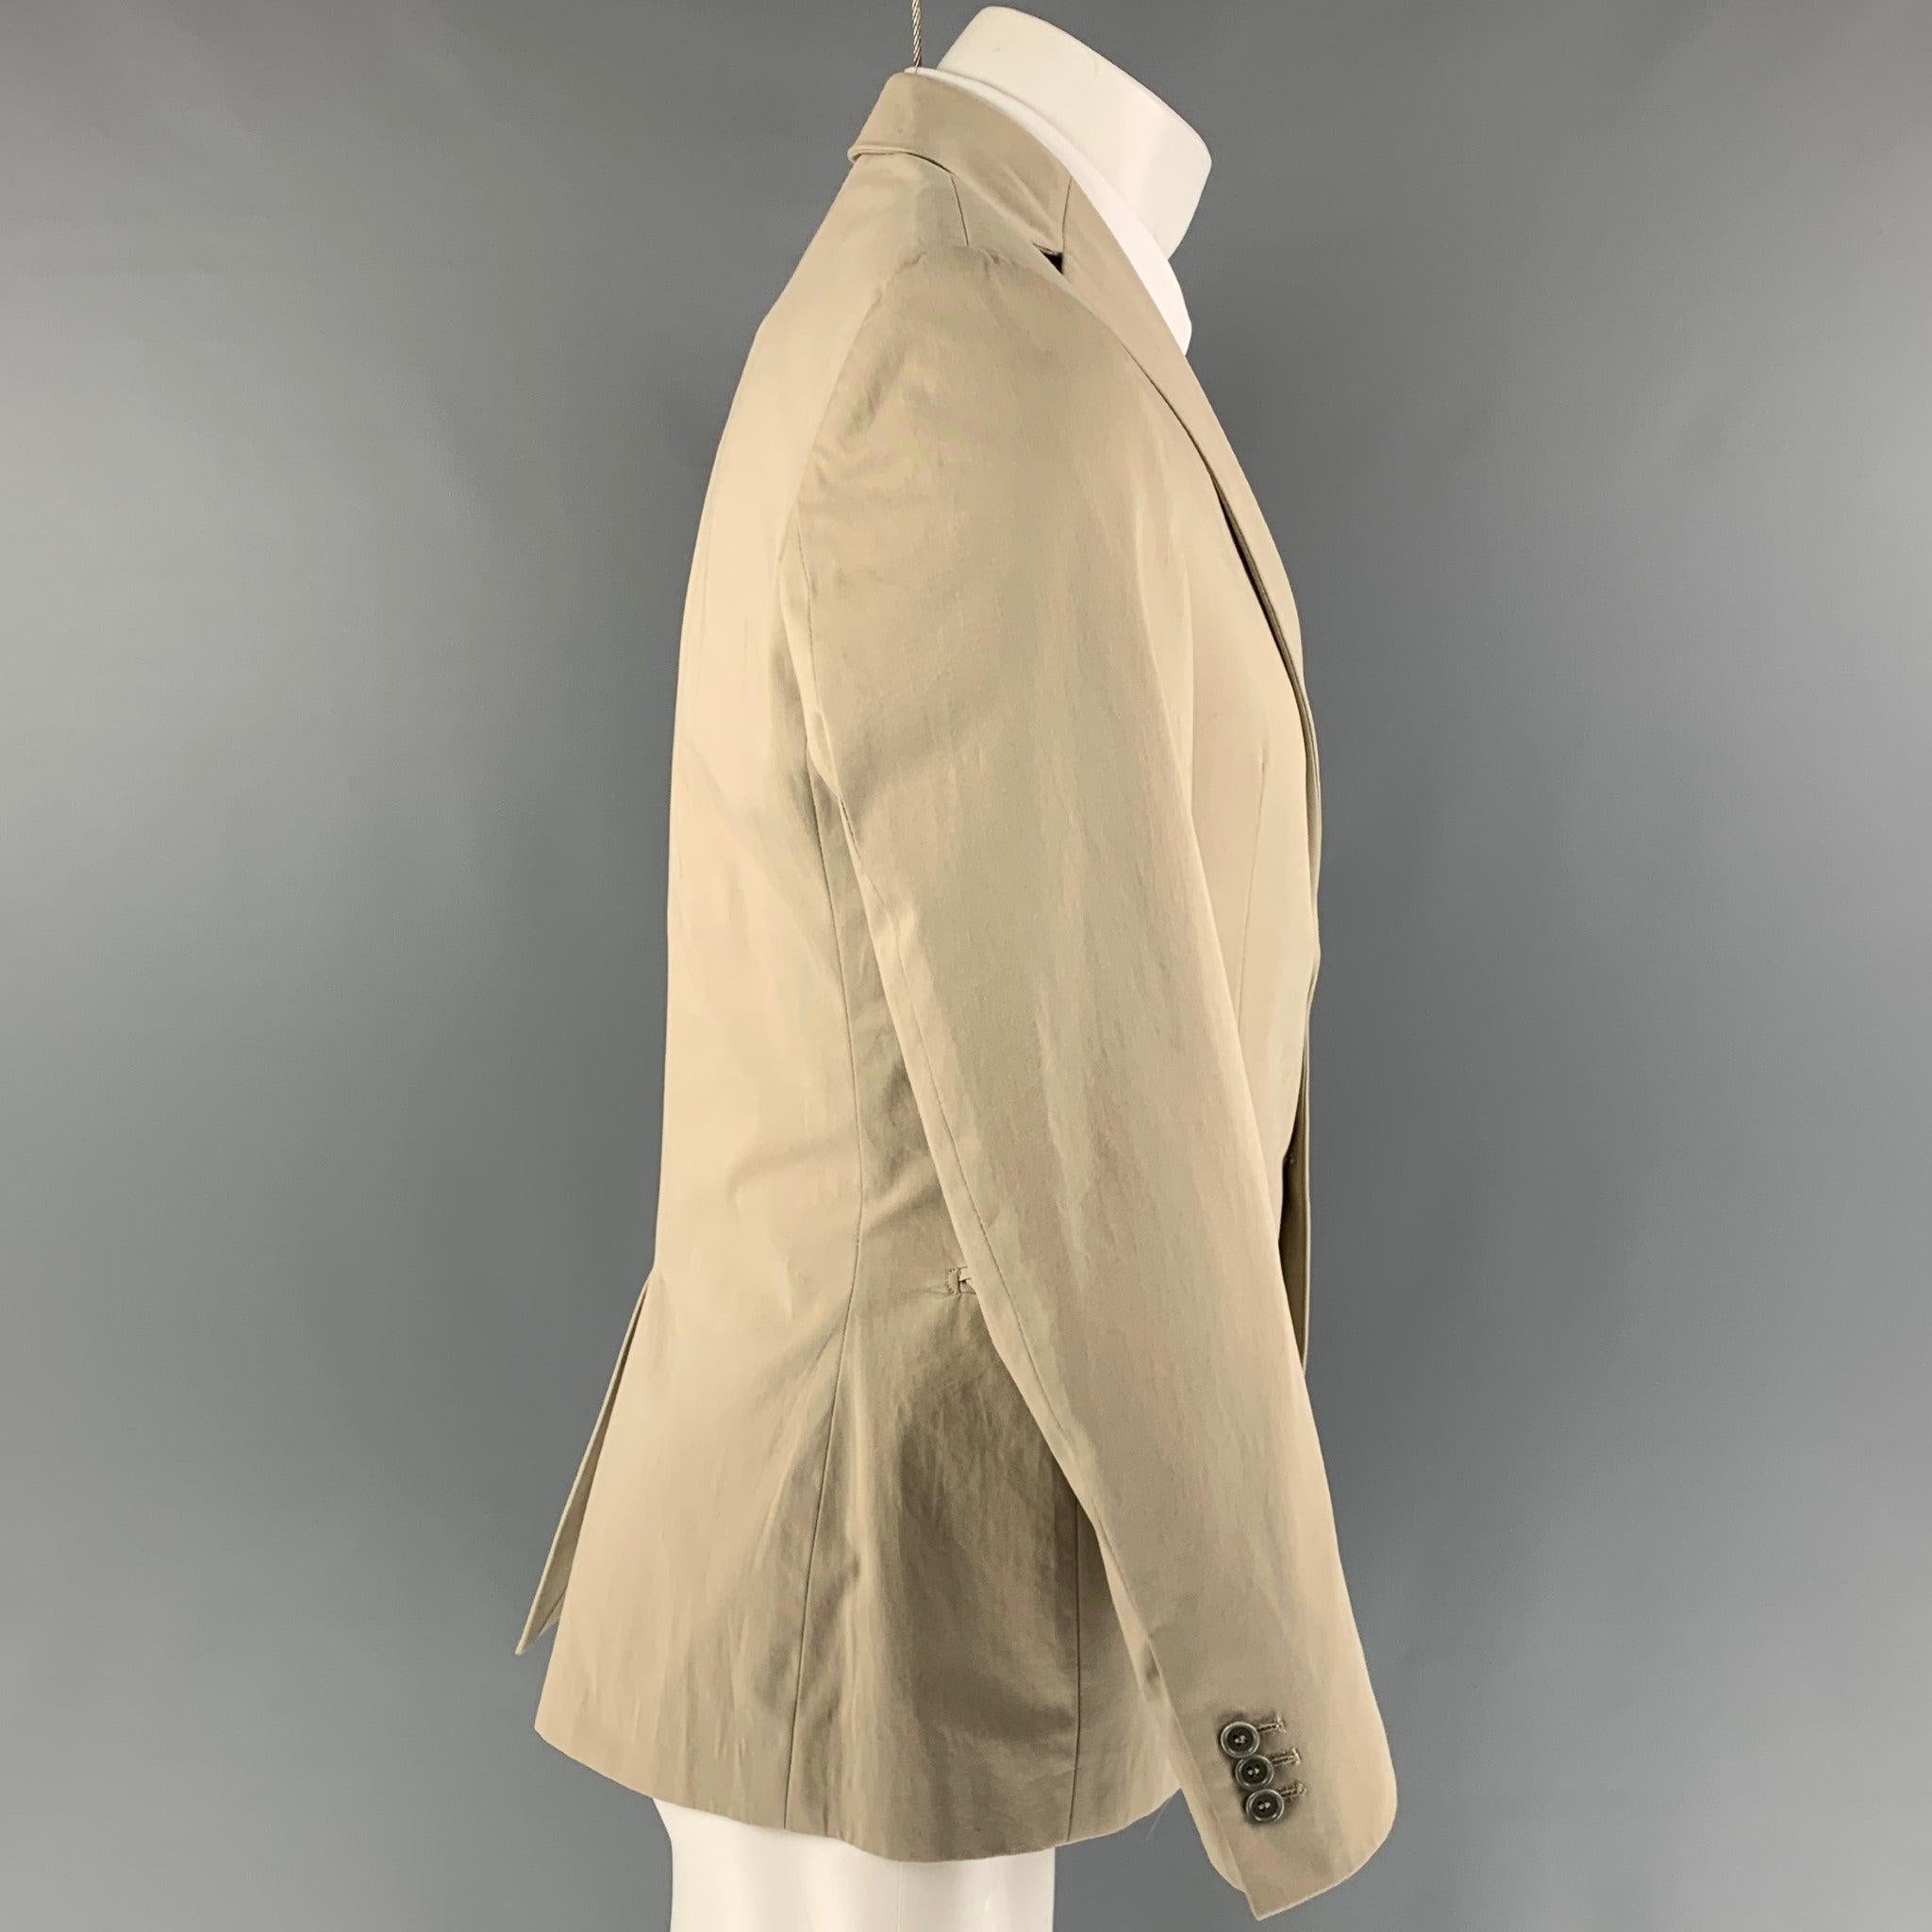 BARNEY'S CO-OP sport coat comes in a khaki cotton featuring a notch lapel, flap pockets, single back vent, and a double button closure. Made in Italy.
 Very Good
 Pre-Owned Condition. 
 

 Marked:  46 
 

 Measurements: 
  
 Shoulder:
 17 inches